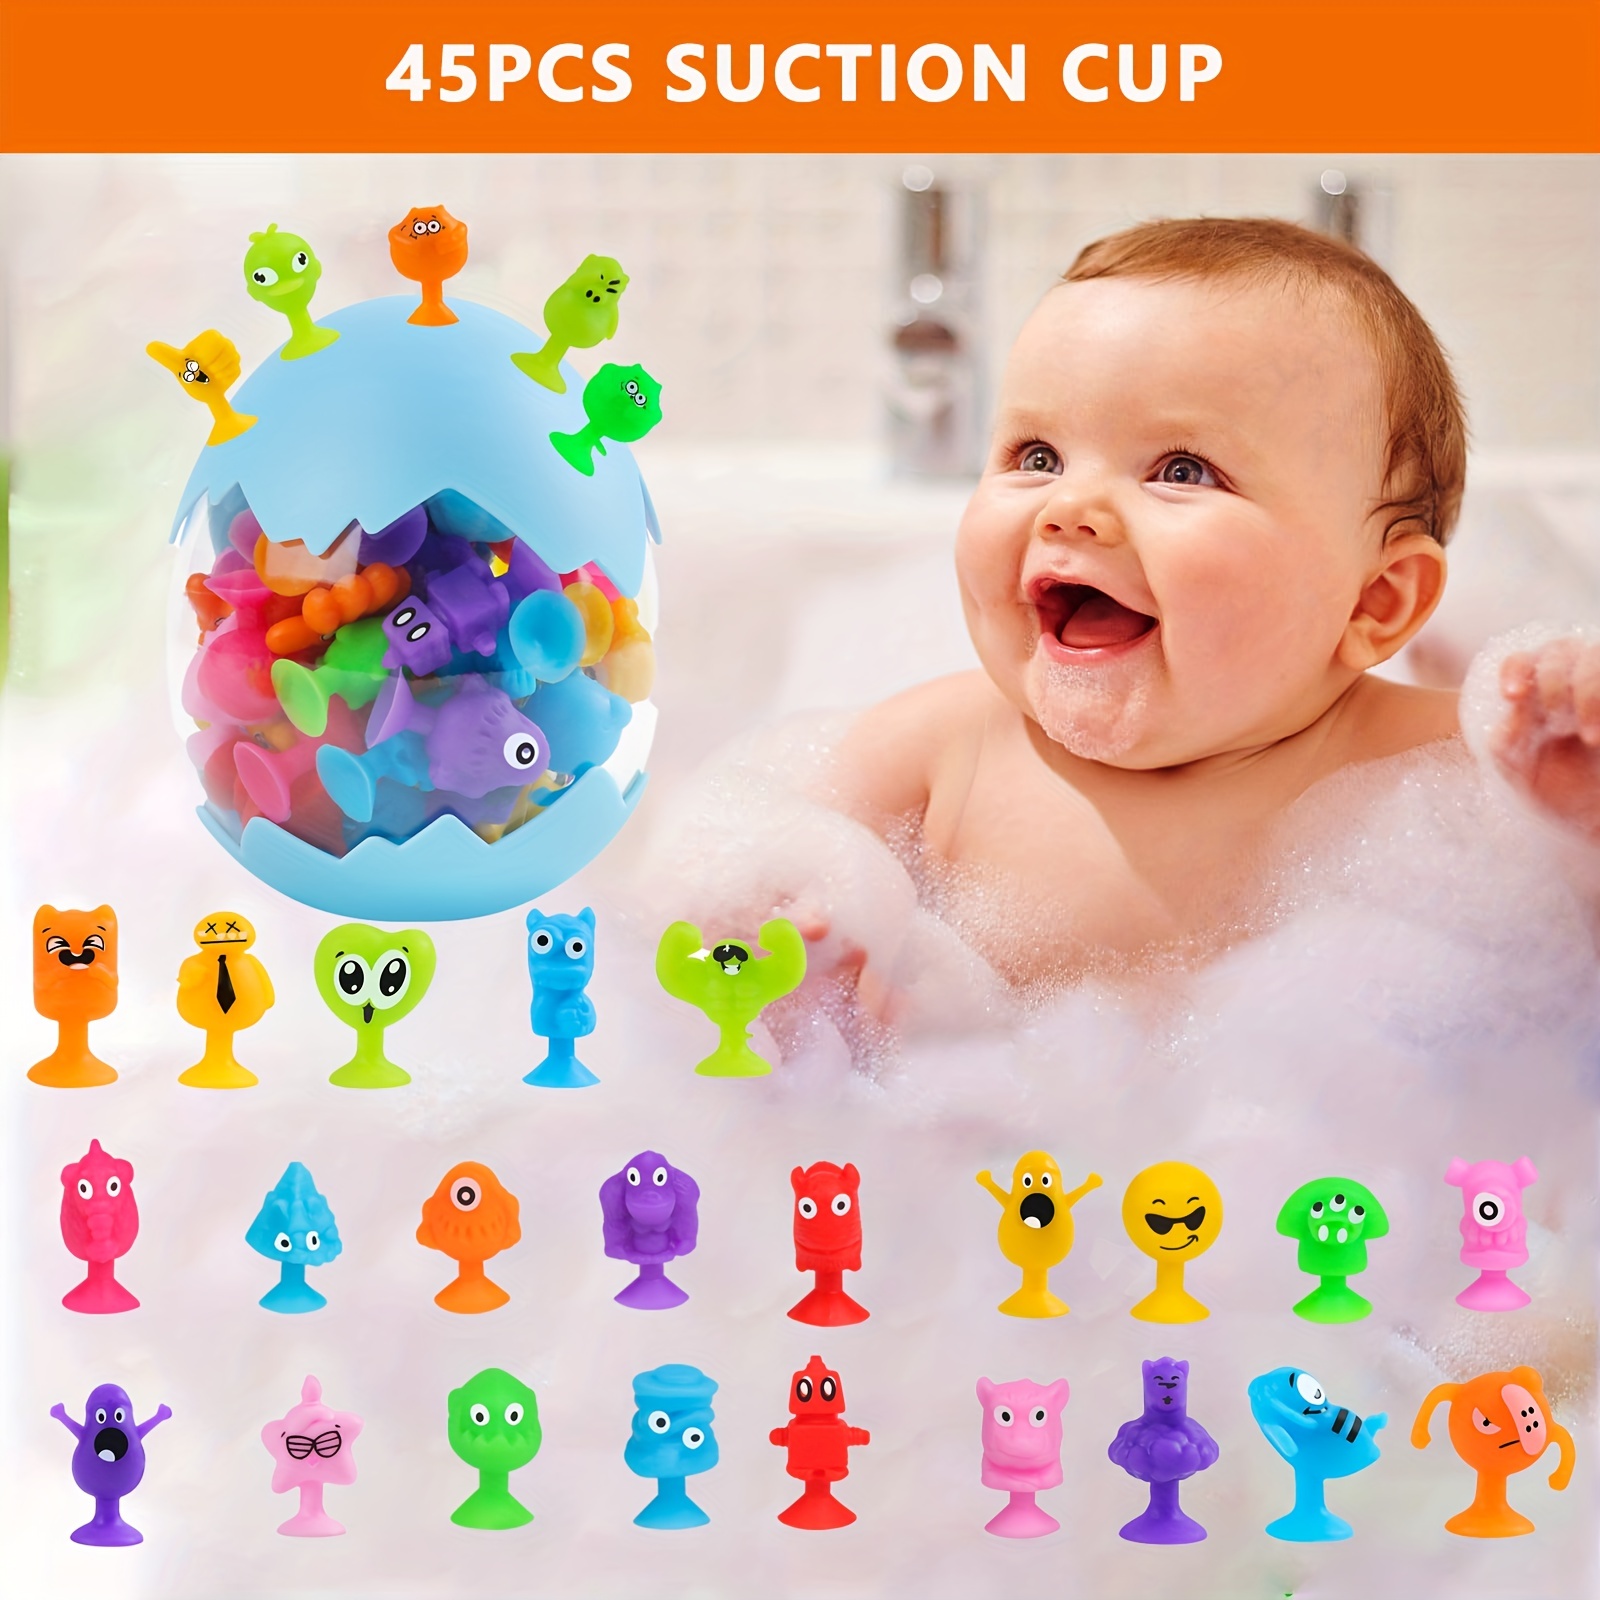  Toddler Textured Suction Cup Toys, 40 PCS Kids Bath Toys Ages  4-8, Sensory Silicone Sucker Toys for Baby Age 3, Travel Window Shower  Bathtub Toys, Montessori Stress Release Ideal Gifts for